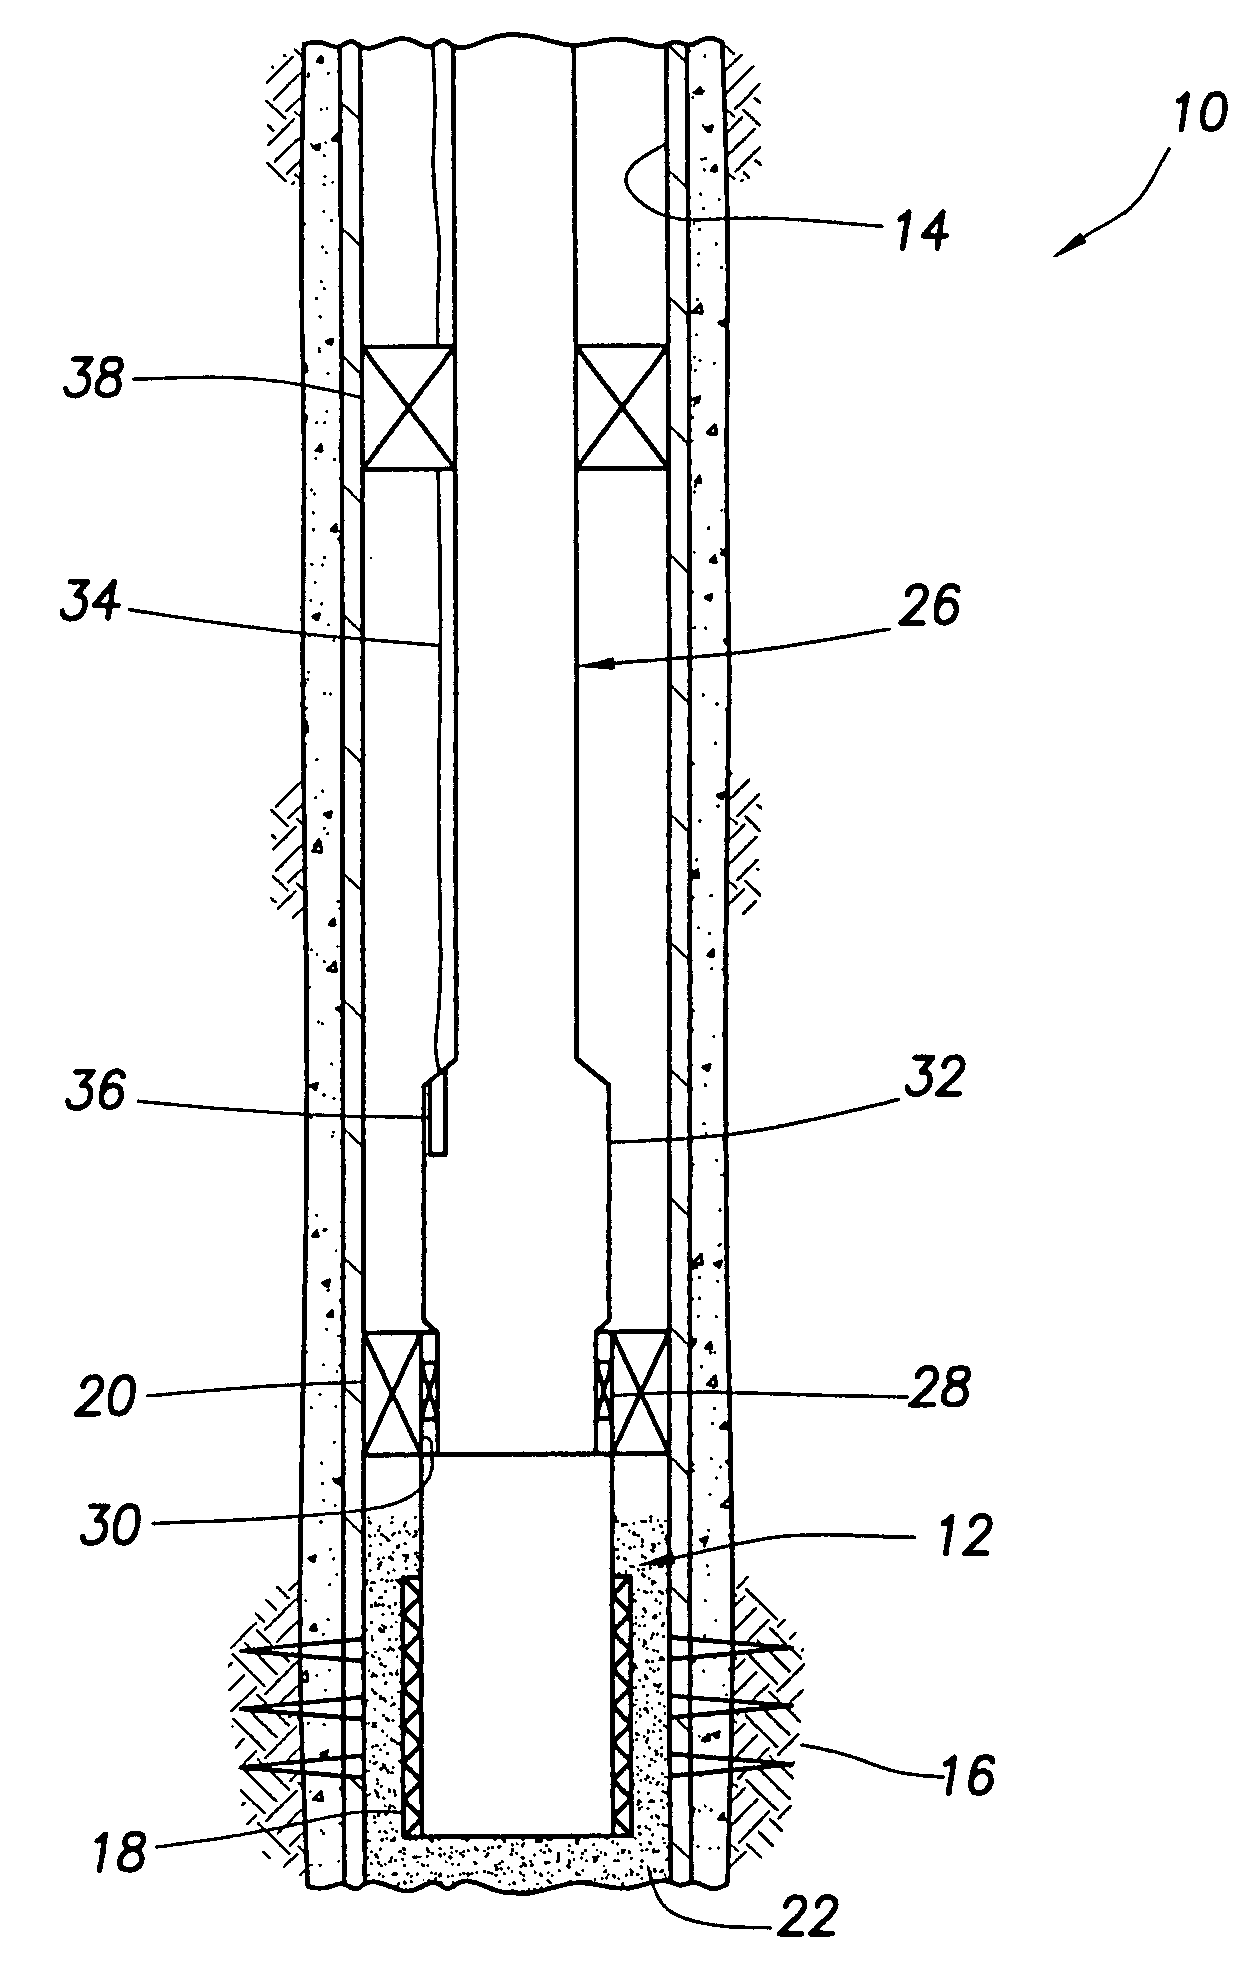 Downhole fiber optic wet connect and gravel pack completion